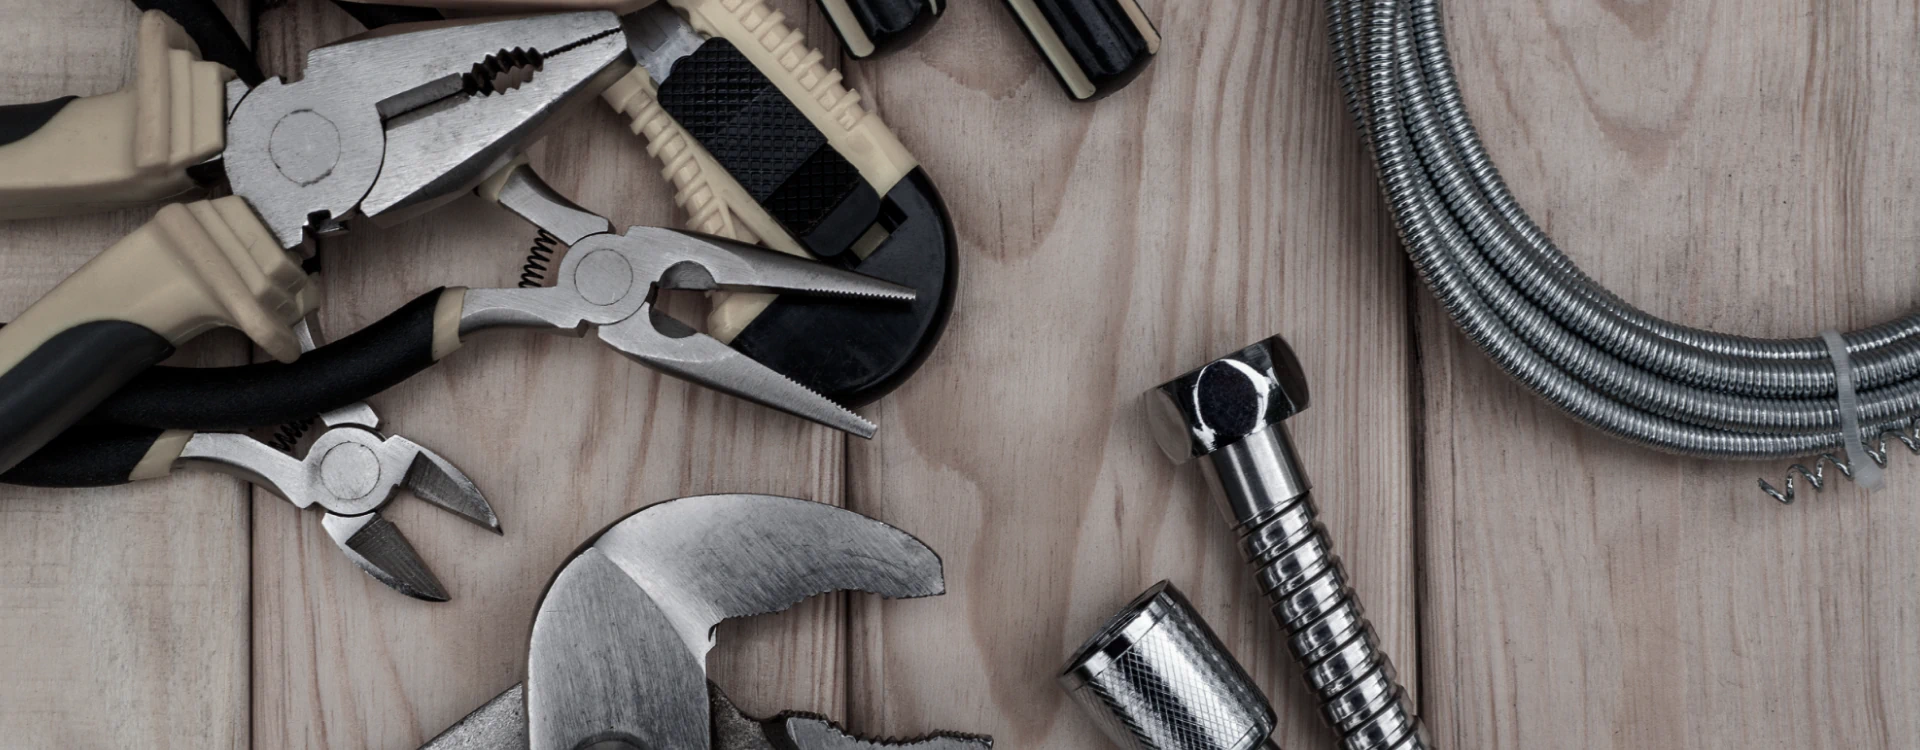 tools for handyman and plumber